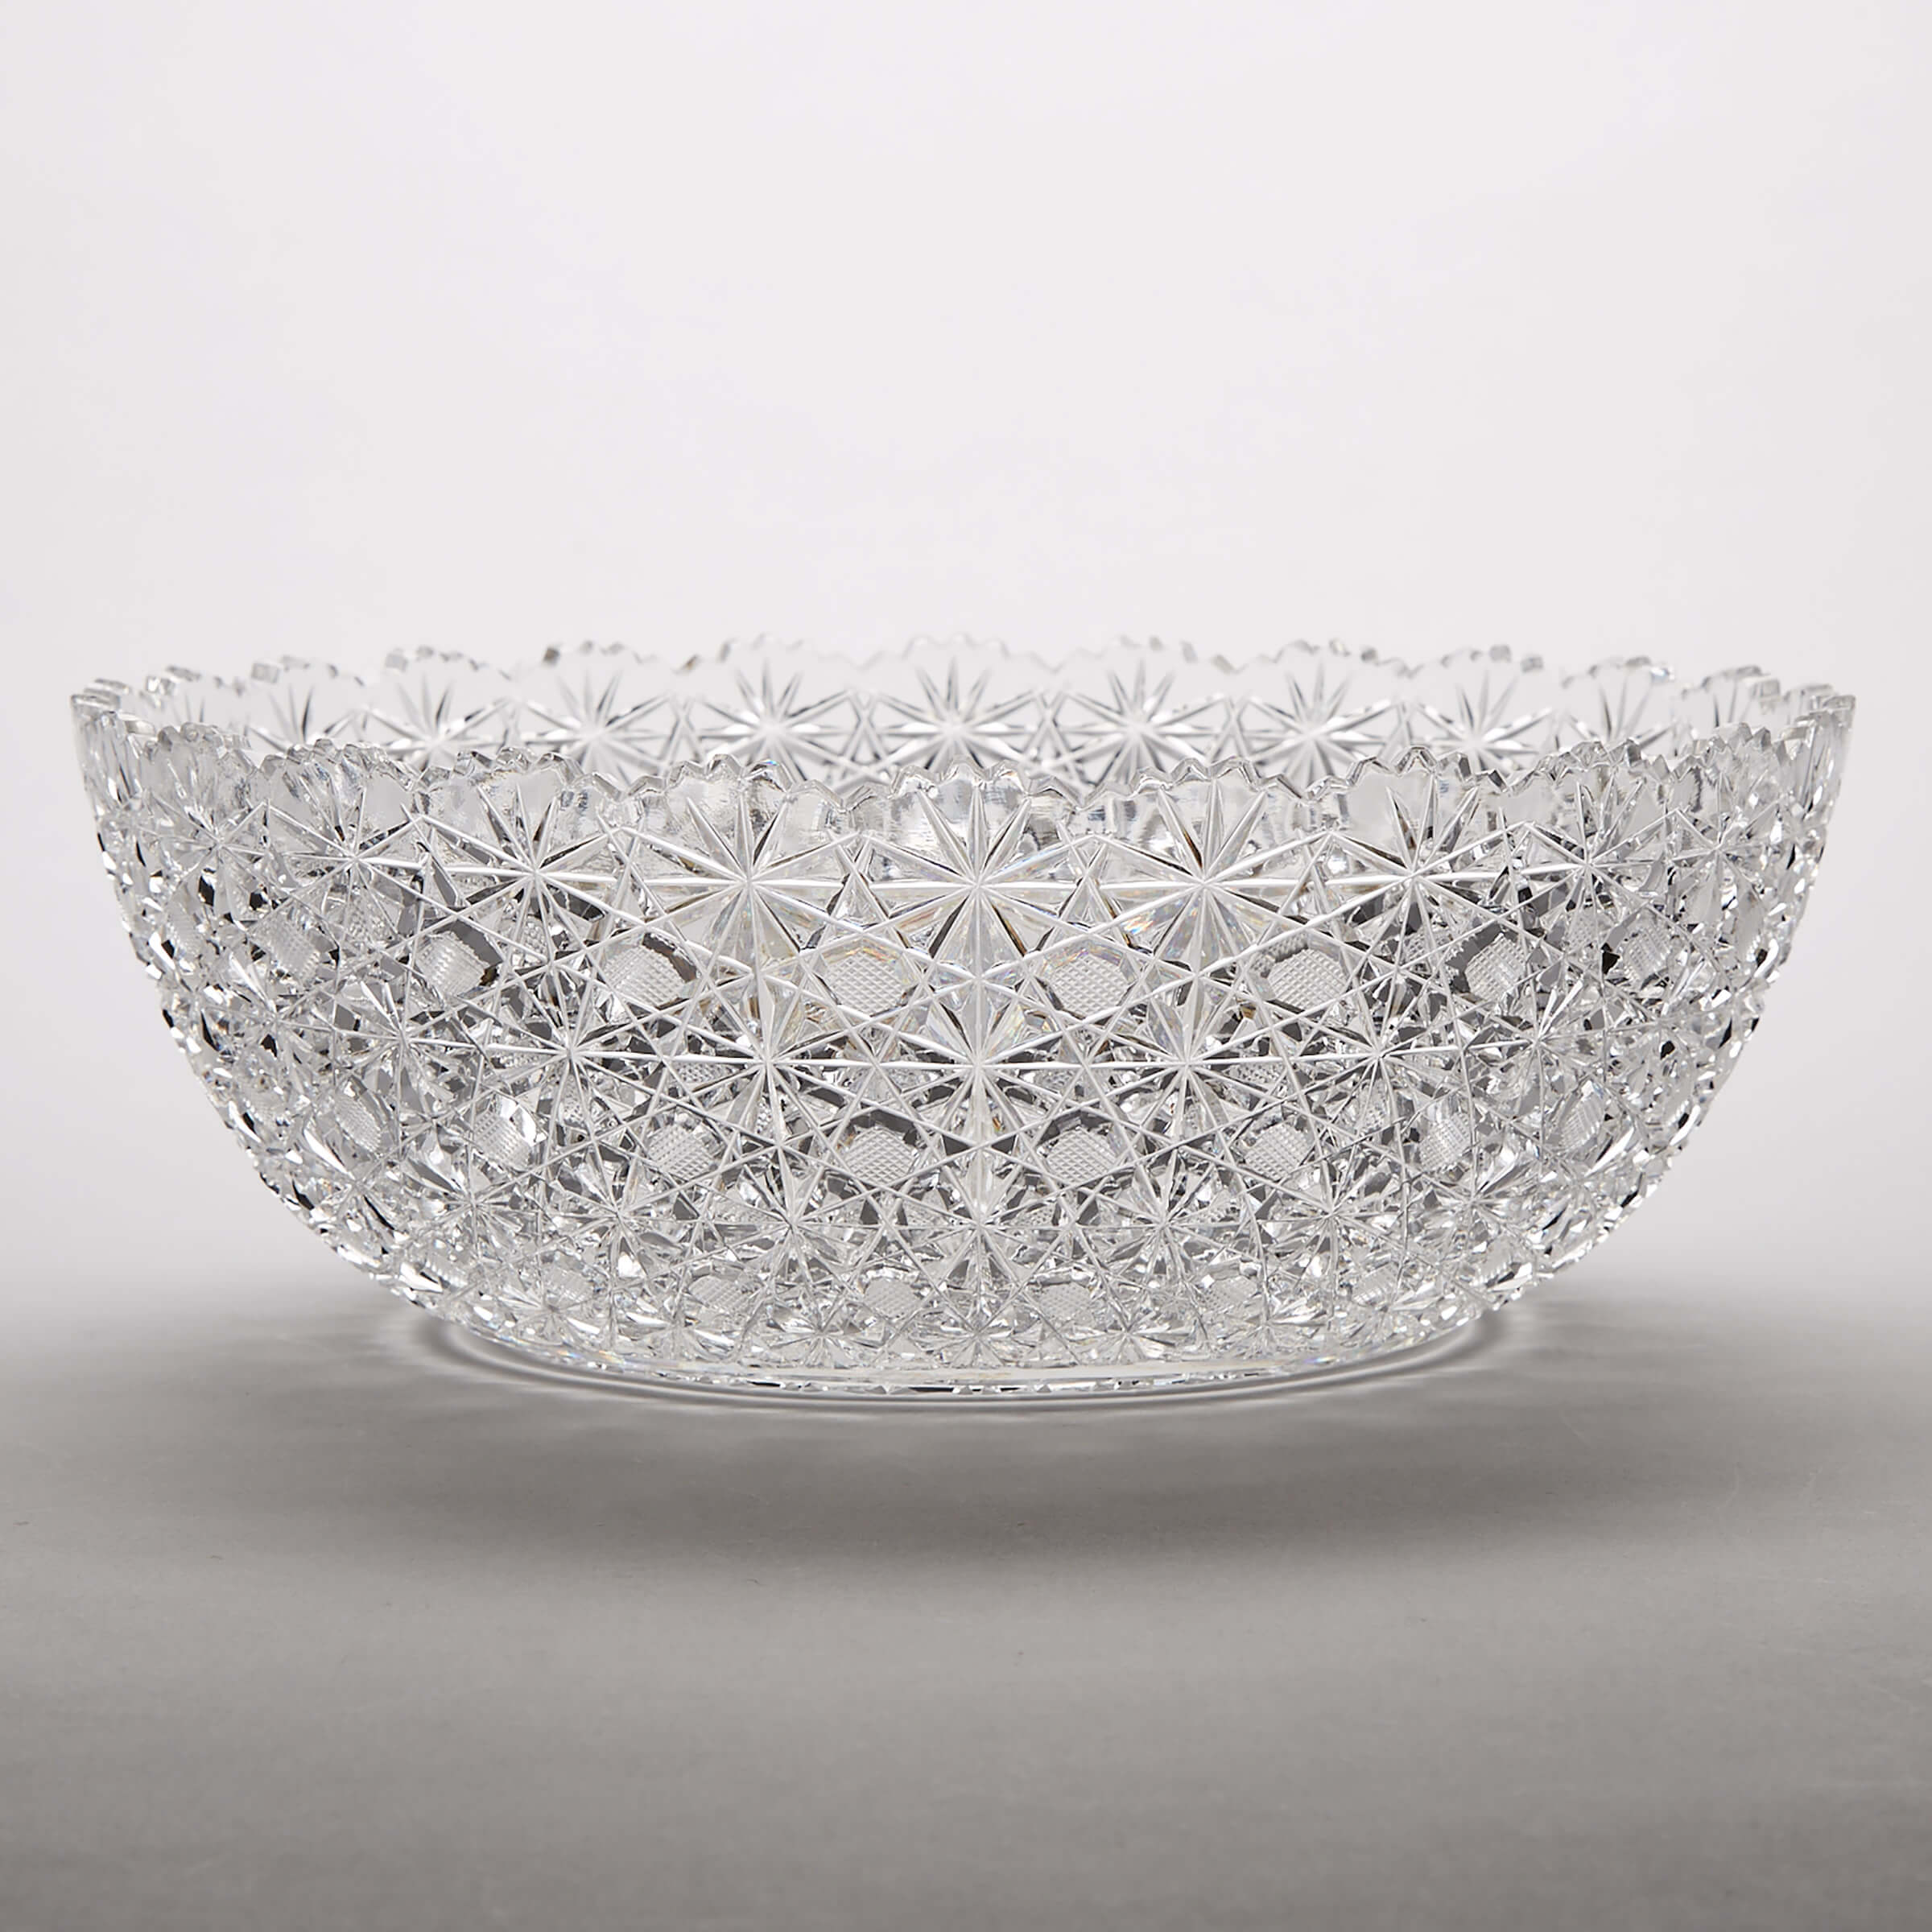 North American Cut Glass Large Bowl, early 20th century